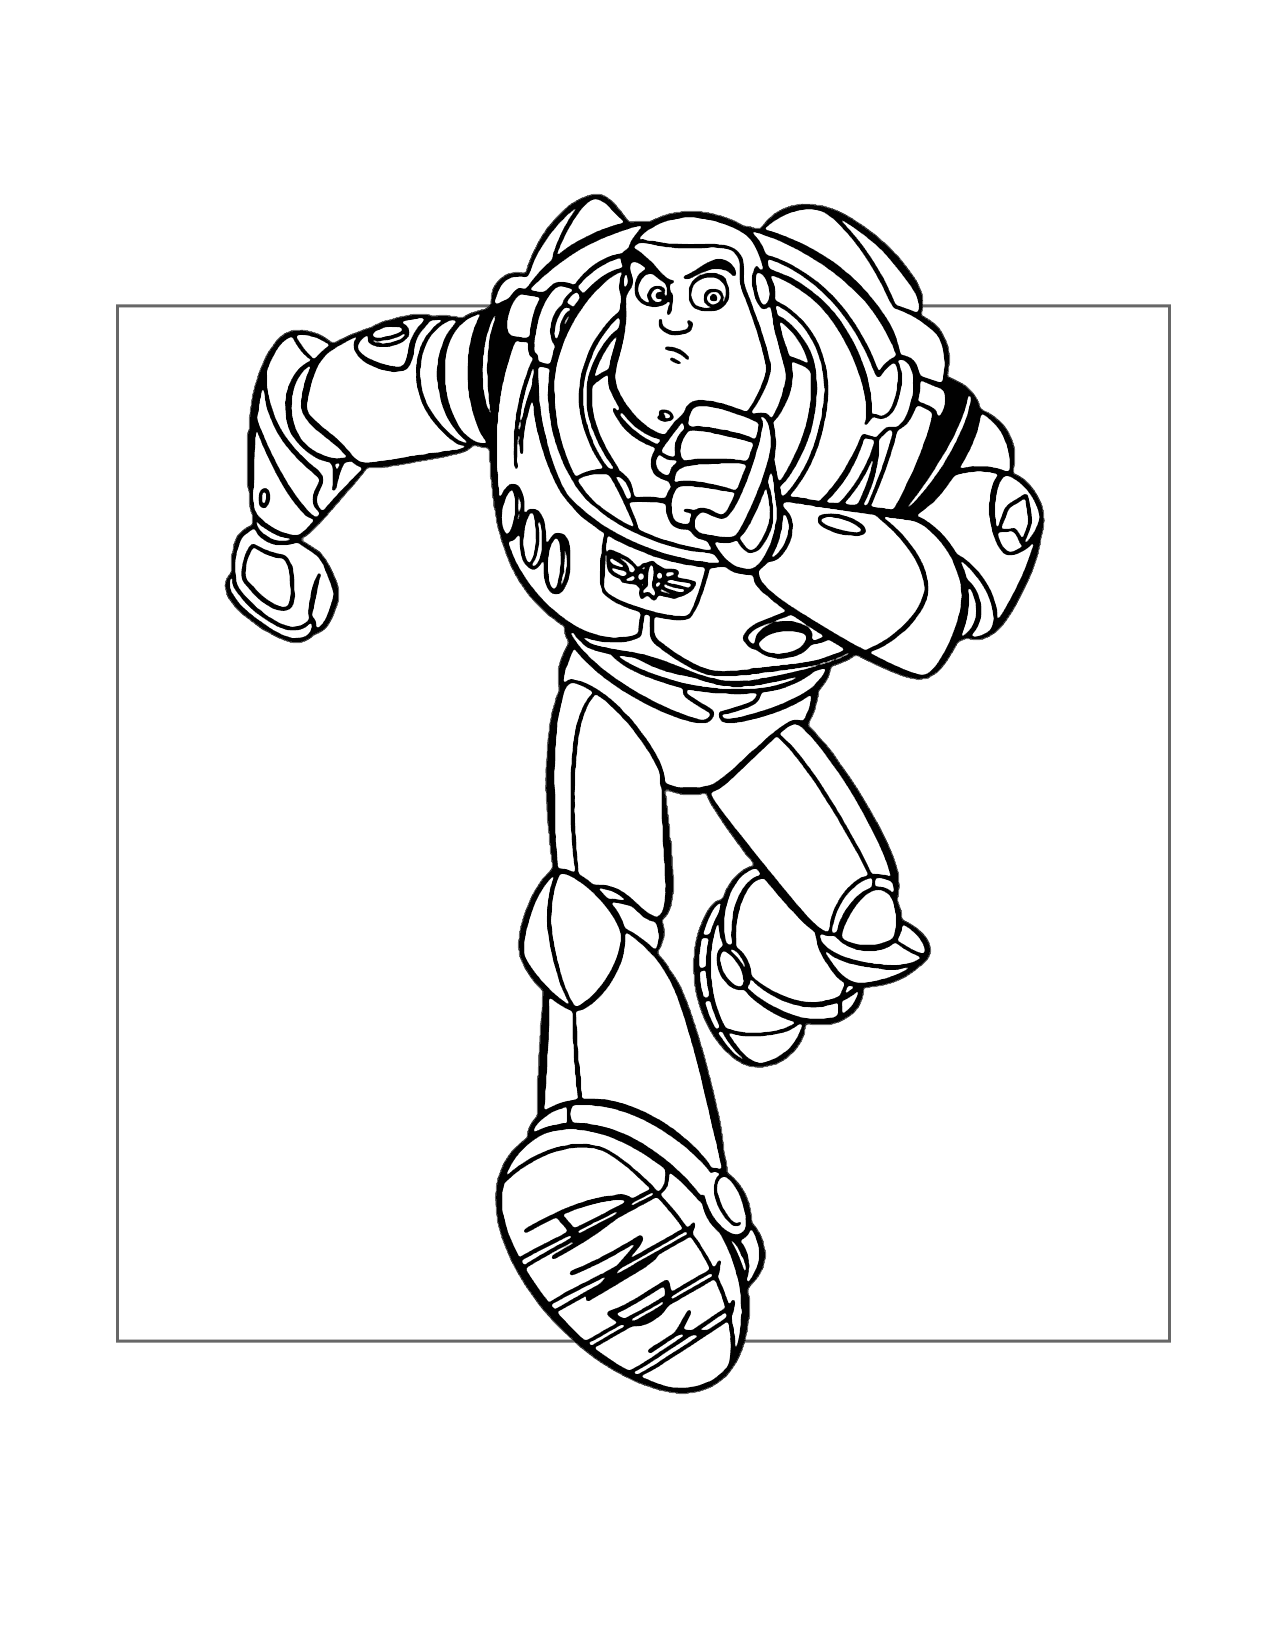 Buzz Lightyear Running Coloring Page